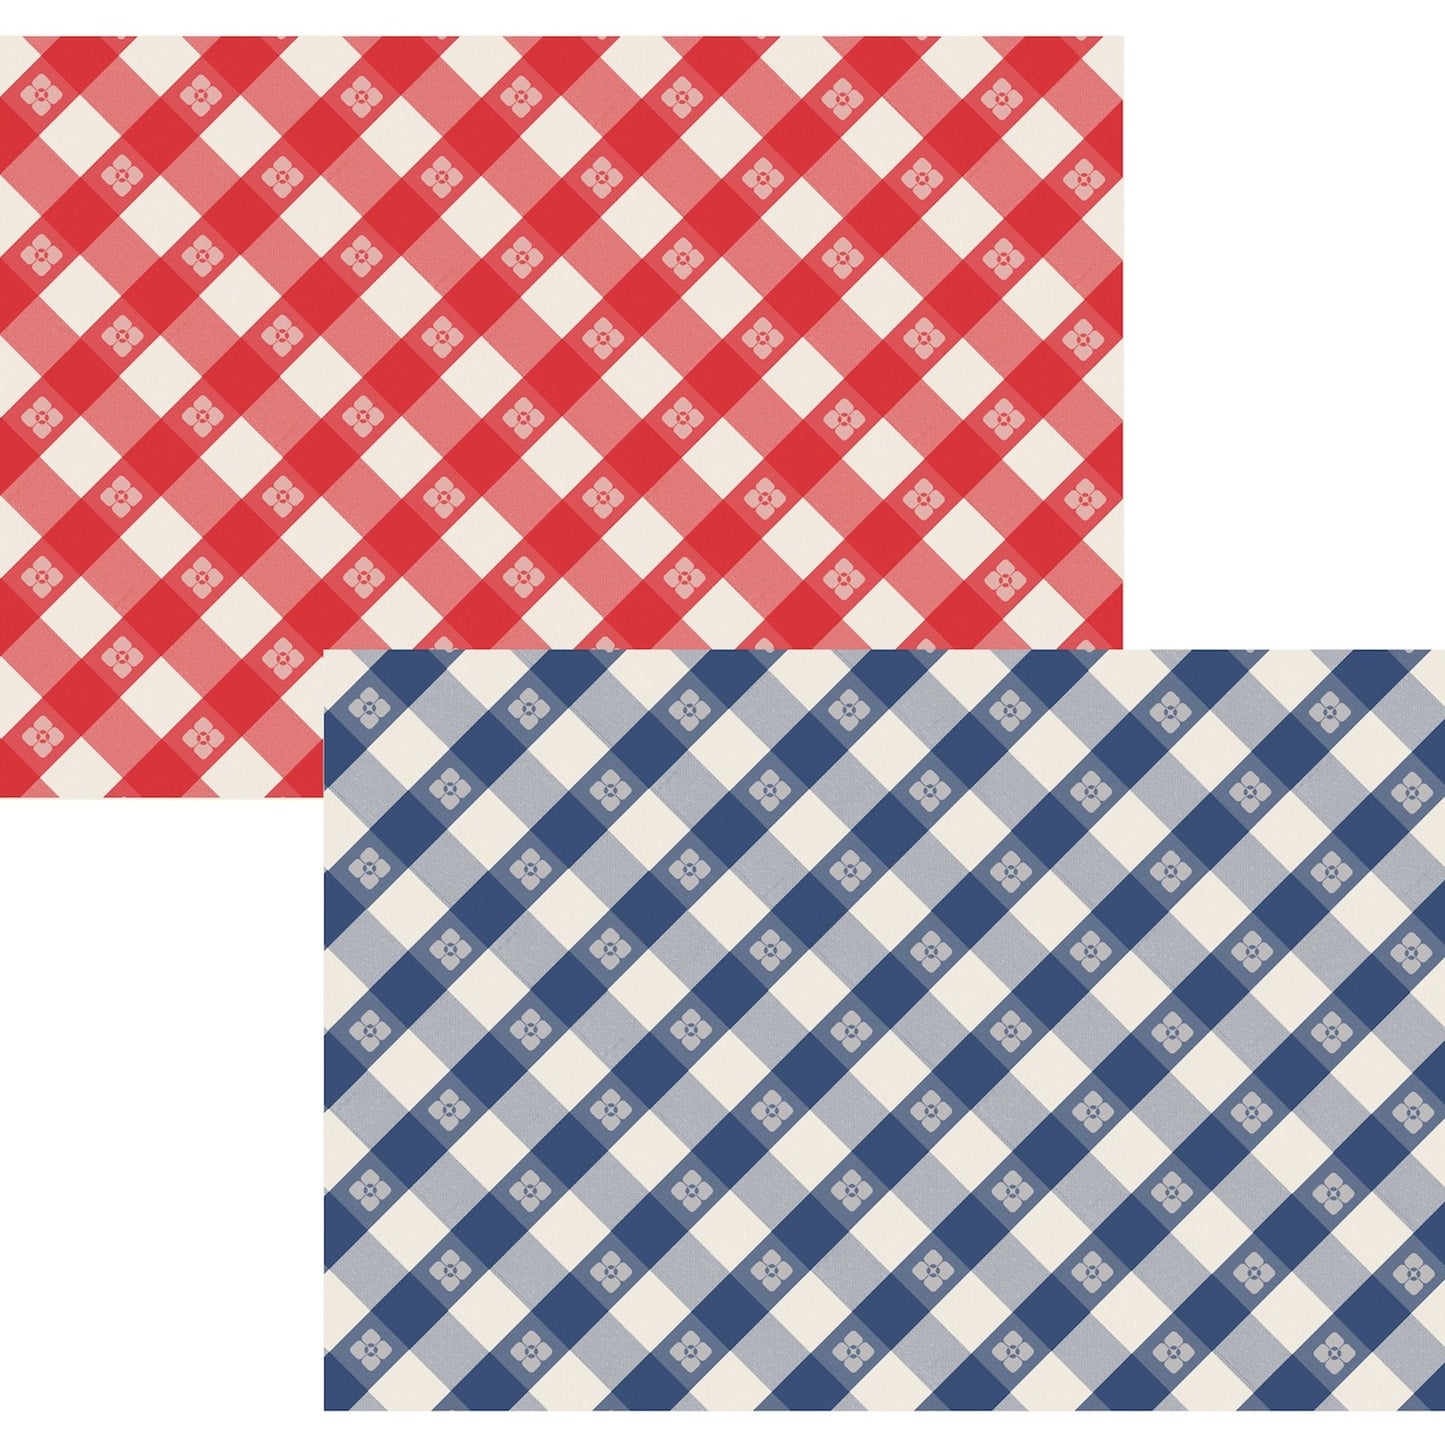 A photo of both the Red and Blue and White Check paper placemat 